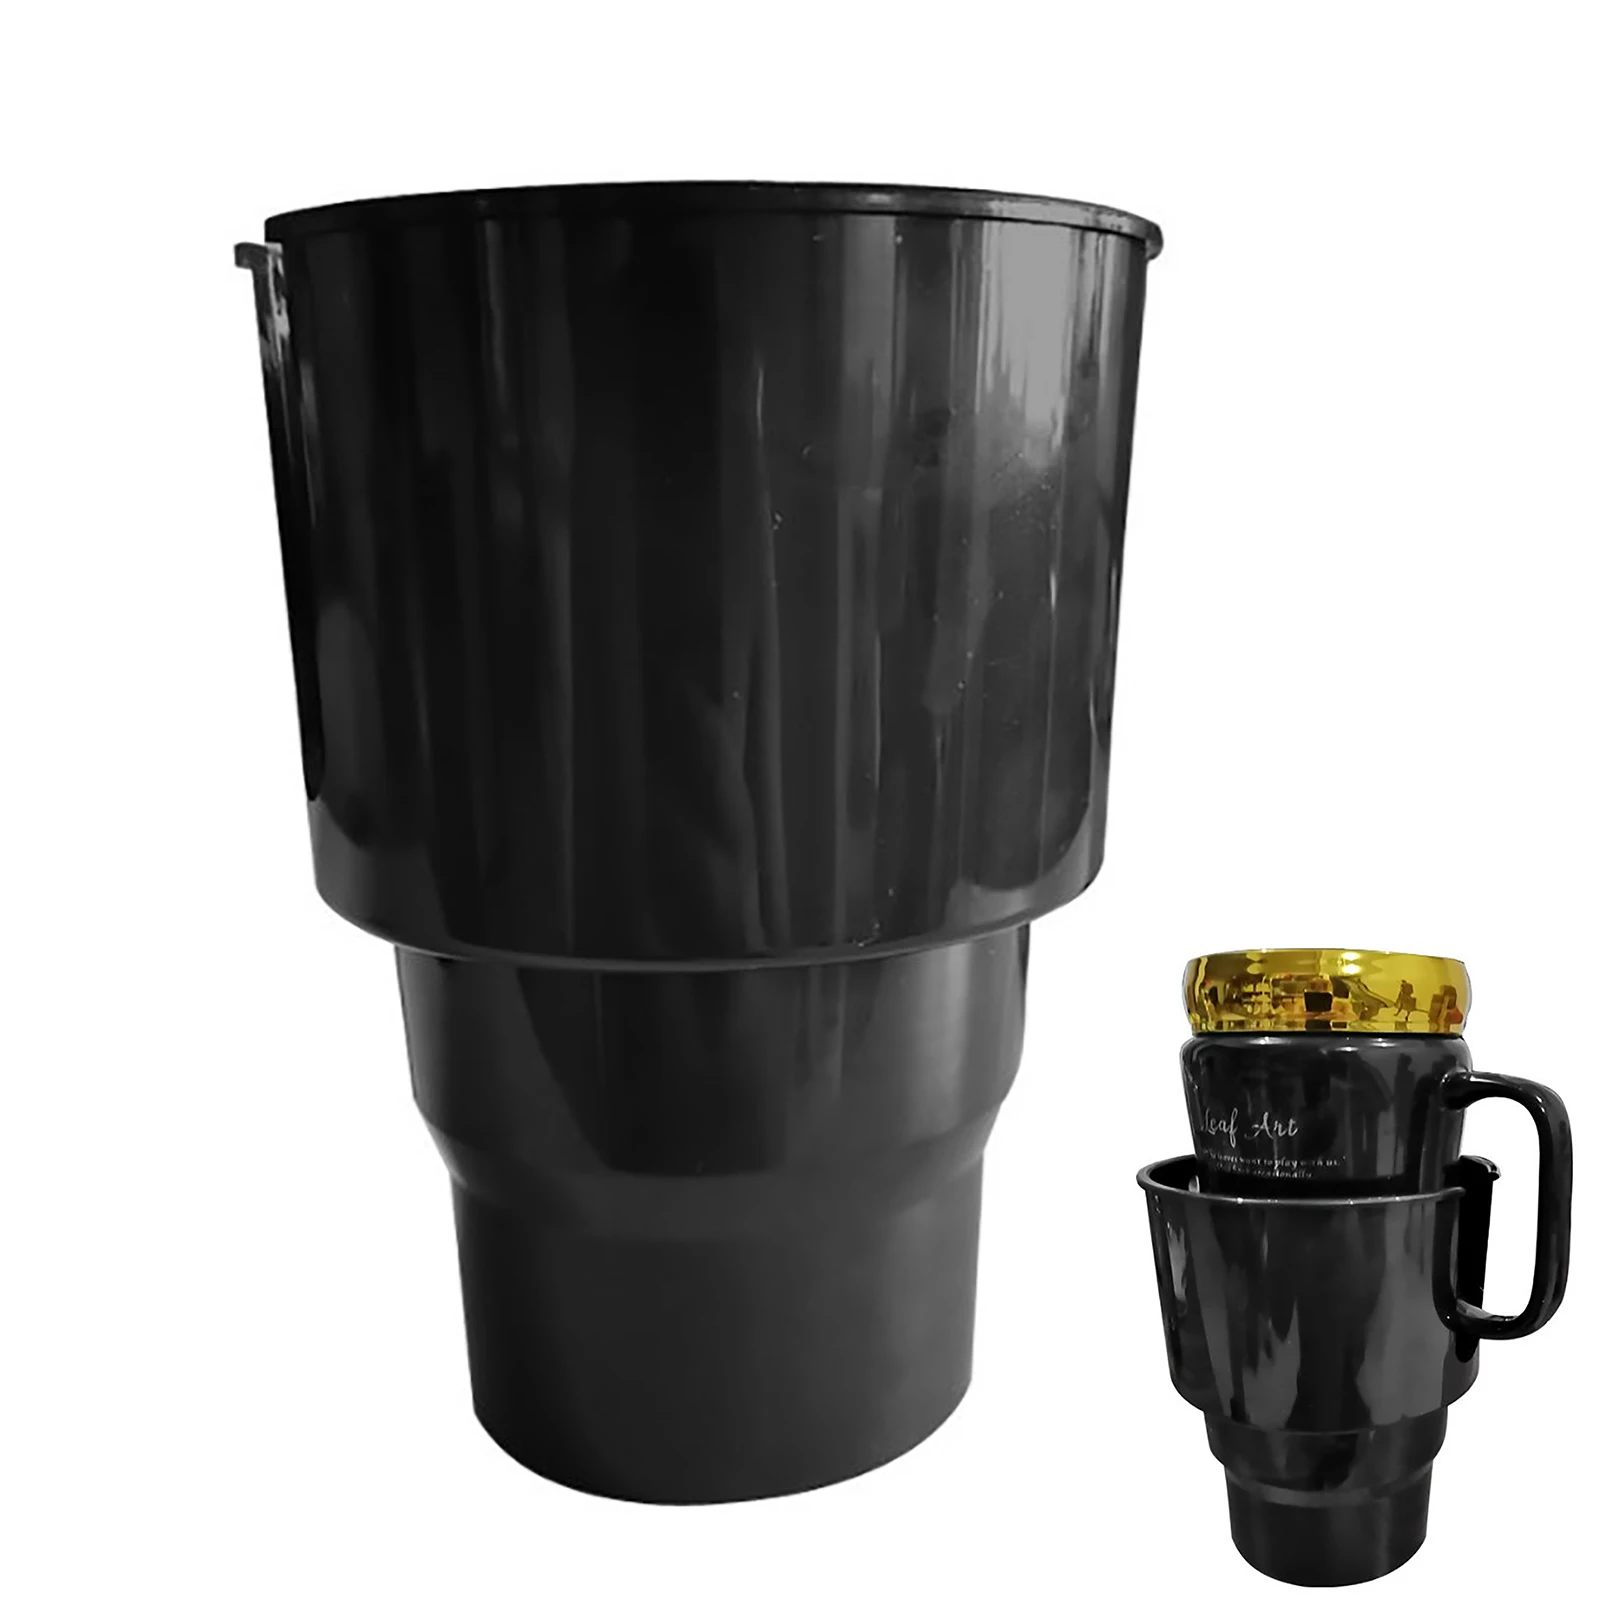 1pcs plastic cup holder suitable for 30oz stainless steel car